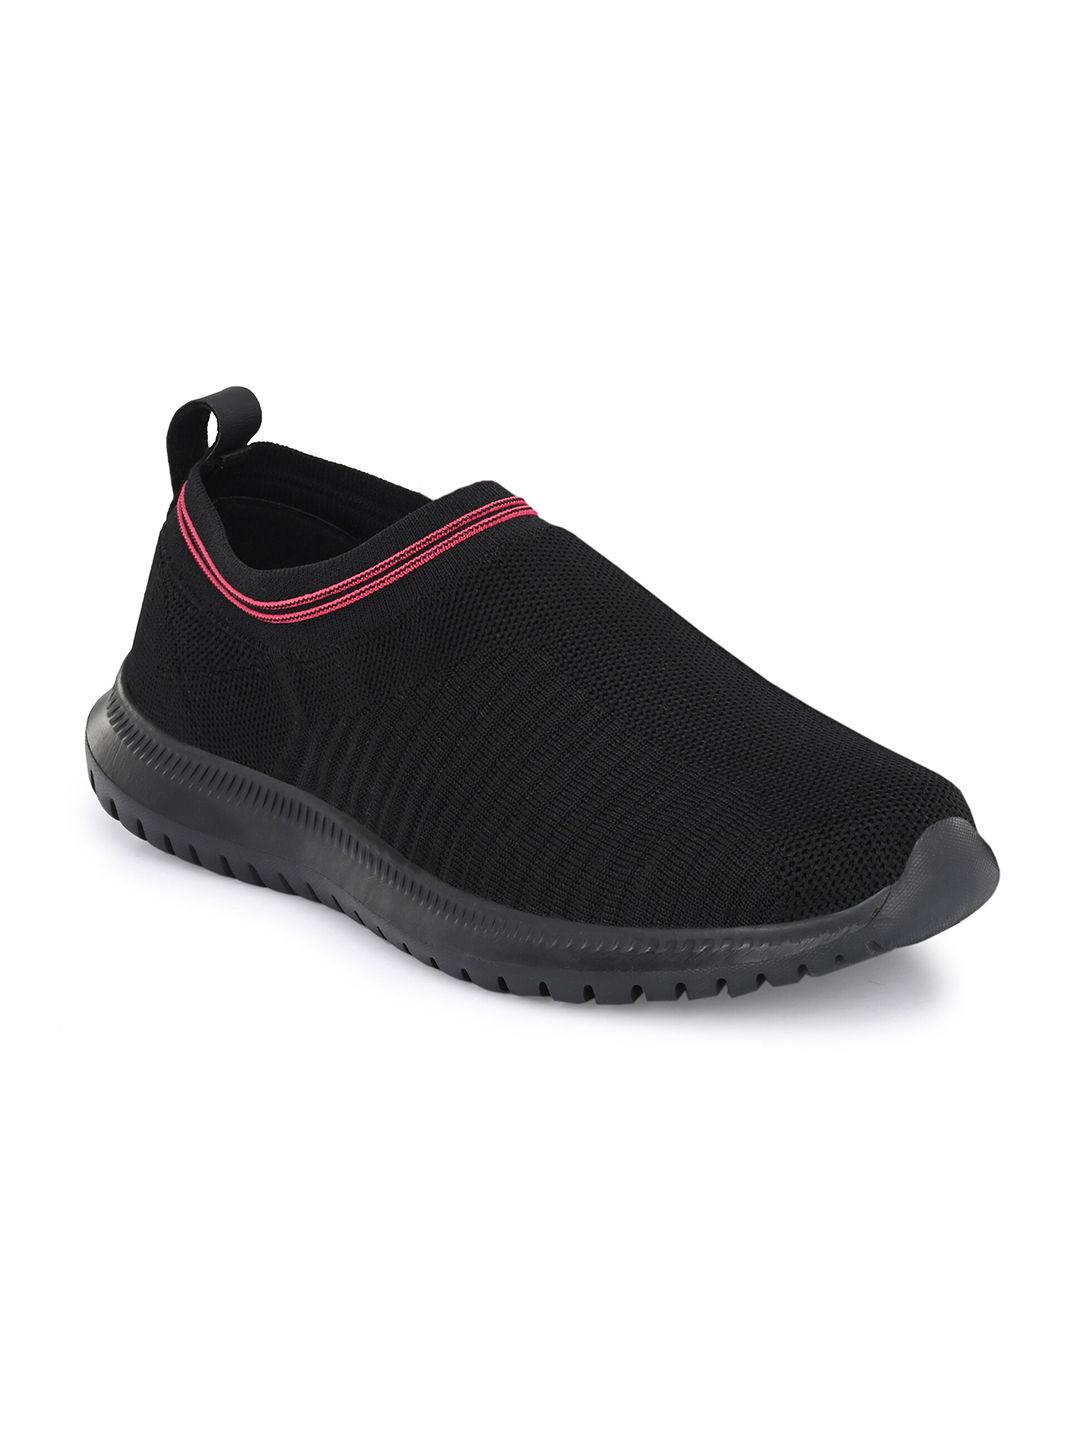 OFF LIMITS Women Black Mesh Walking Non-Marking Shoes Price in India